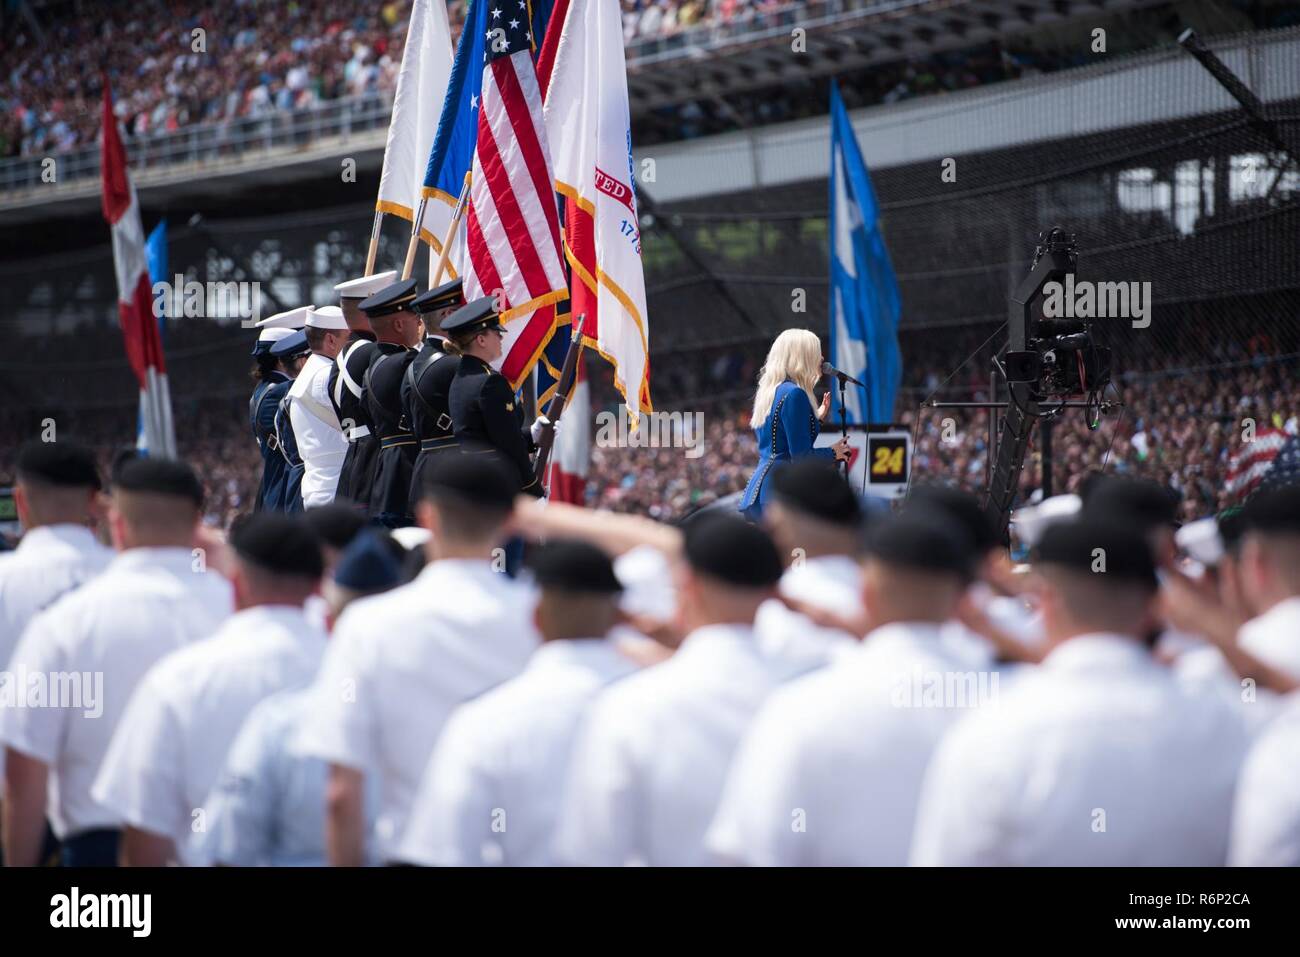 Service members from across the armed forces salute the colors while Bebe Rexha sings the National Anthem during the pre-race events at the Indy 500 on May 28, 2017. Stock Photo